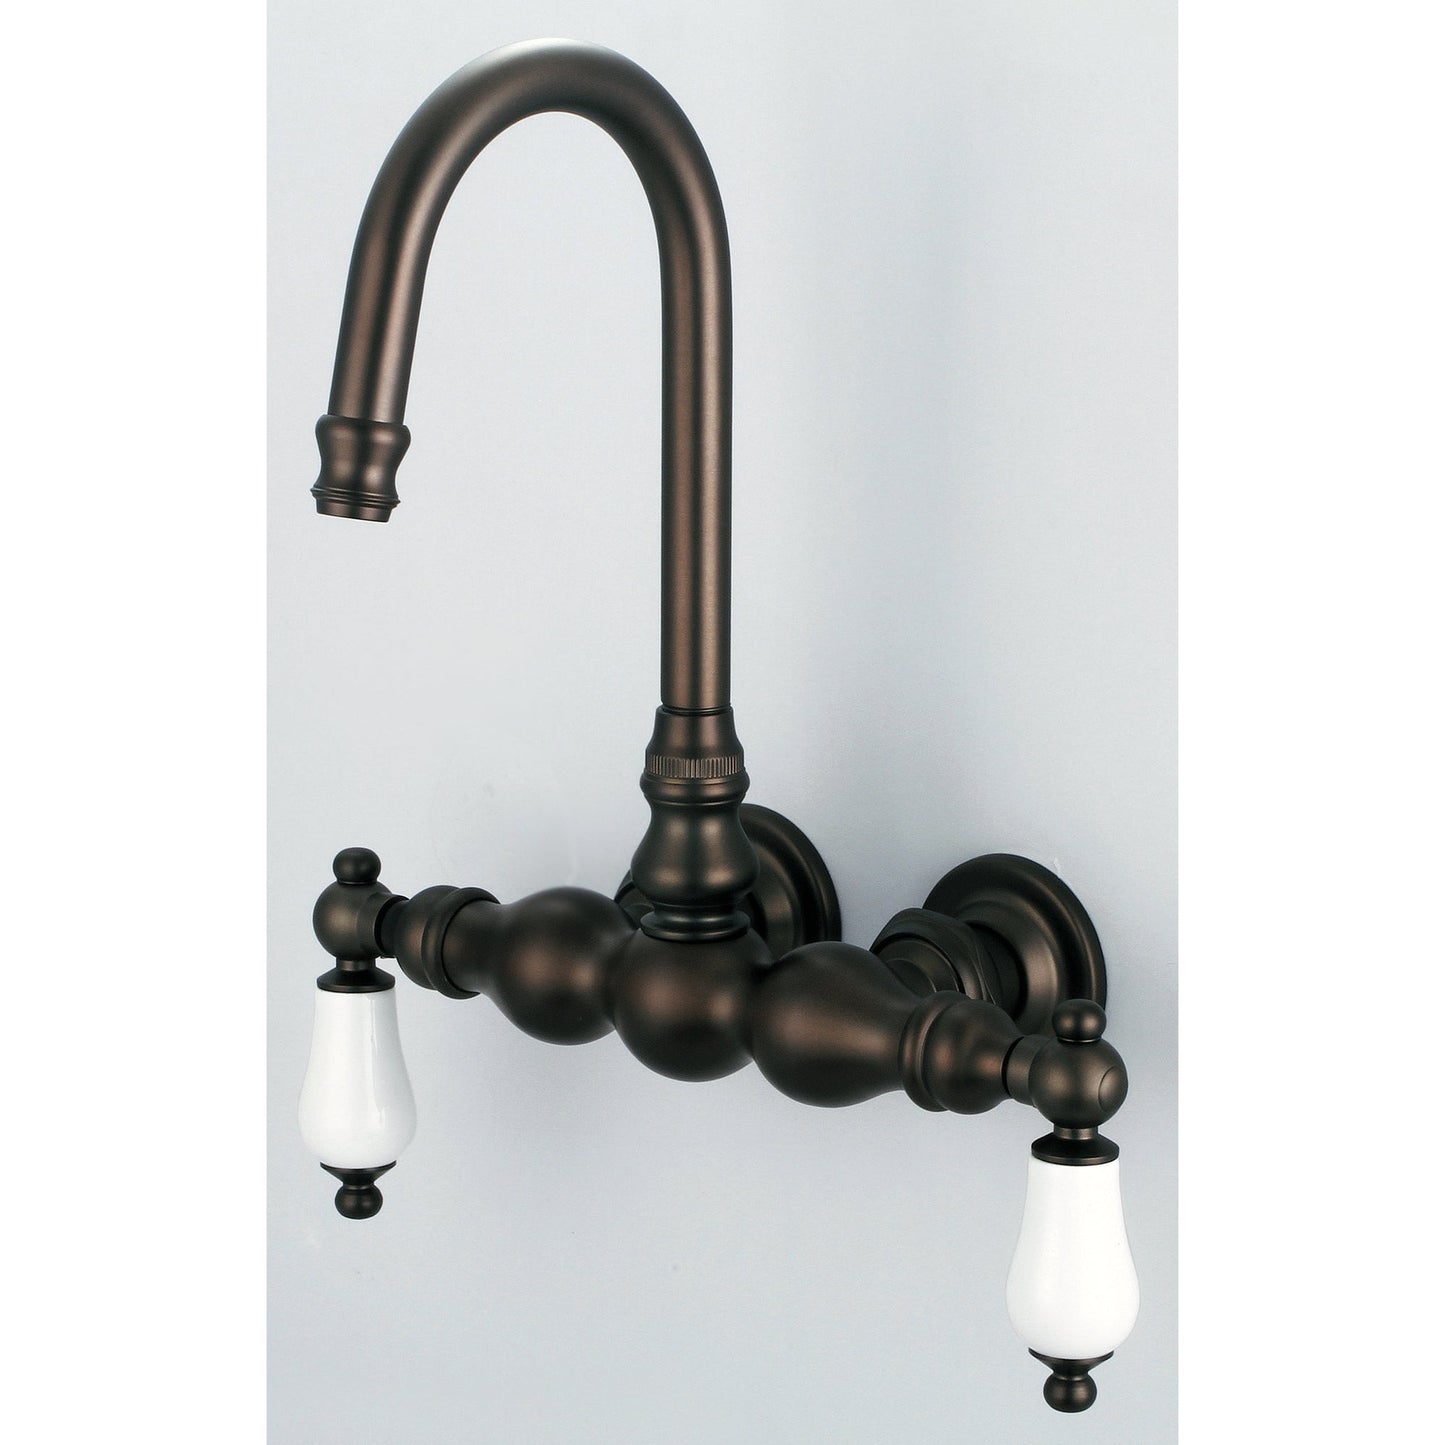 Water Creation Vintage Classic Center Wall Mount Tub F6-0014 9.25" Brown Solid Brass Faucet With Gooseneck Spout And Straight Wall Connector And Porcelain Lever Handles Without Labels